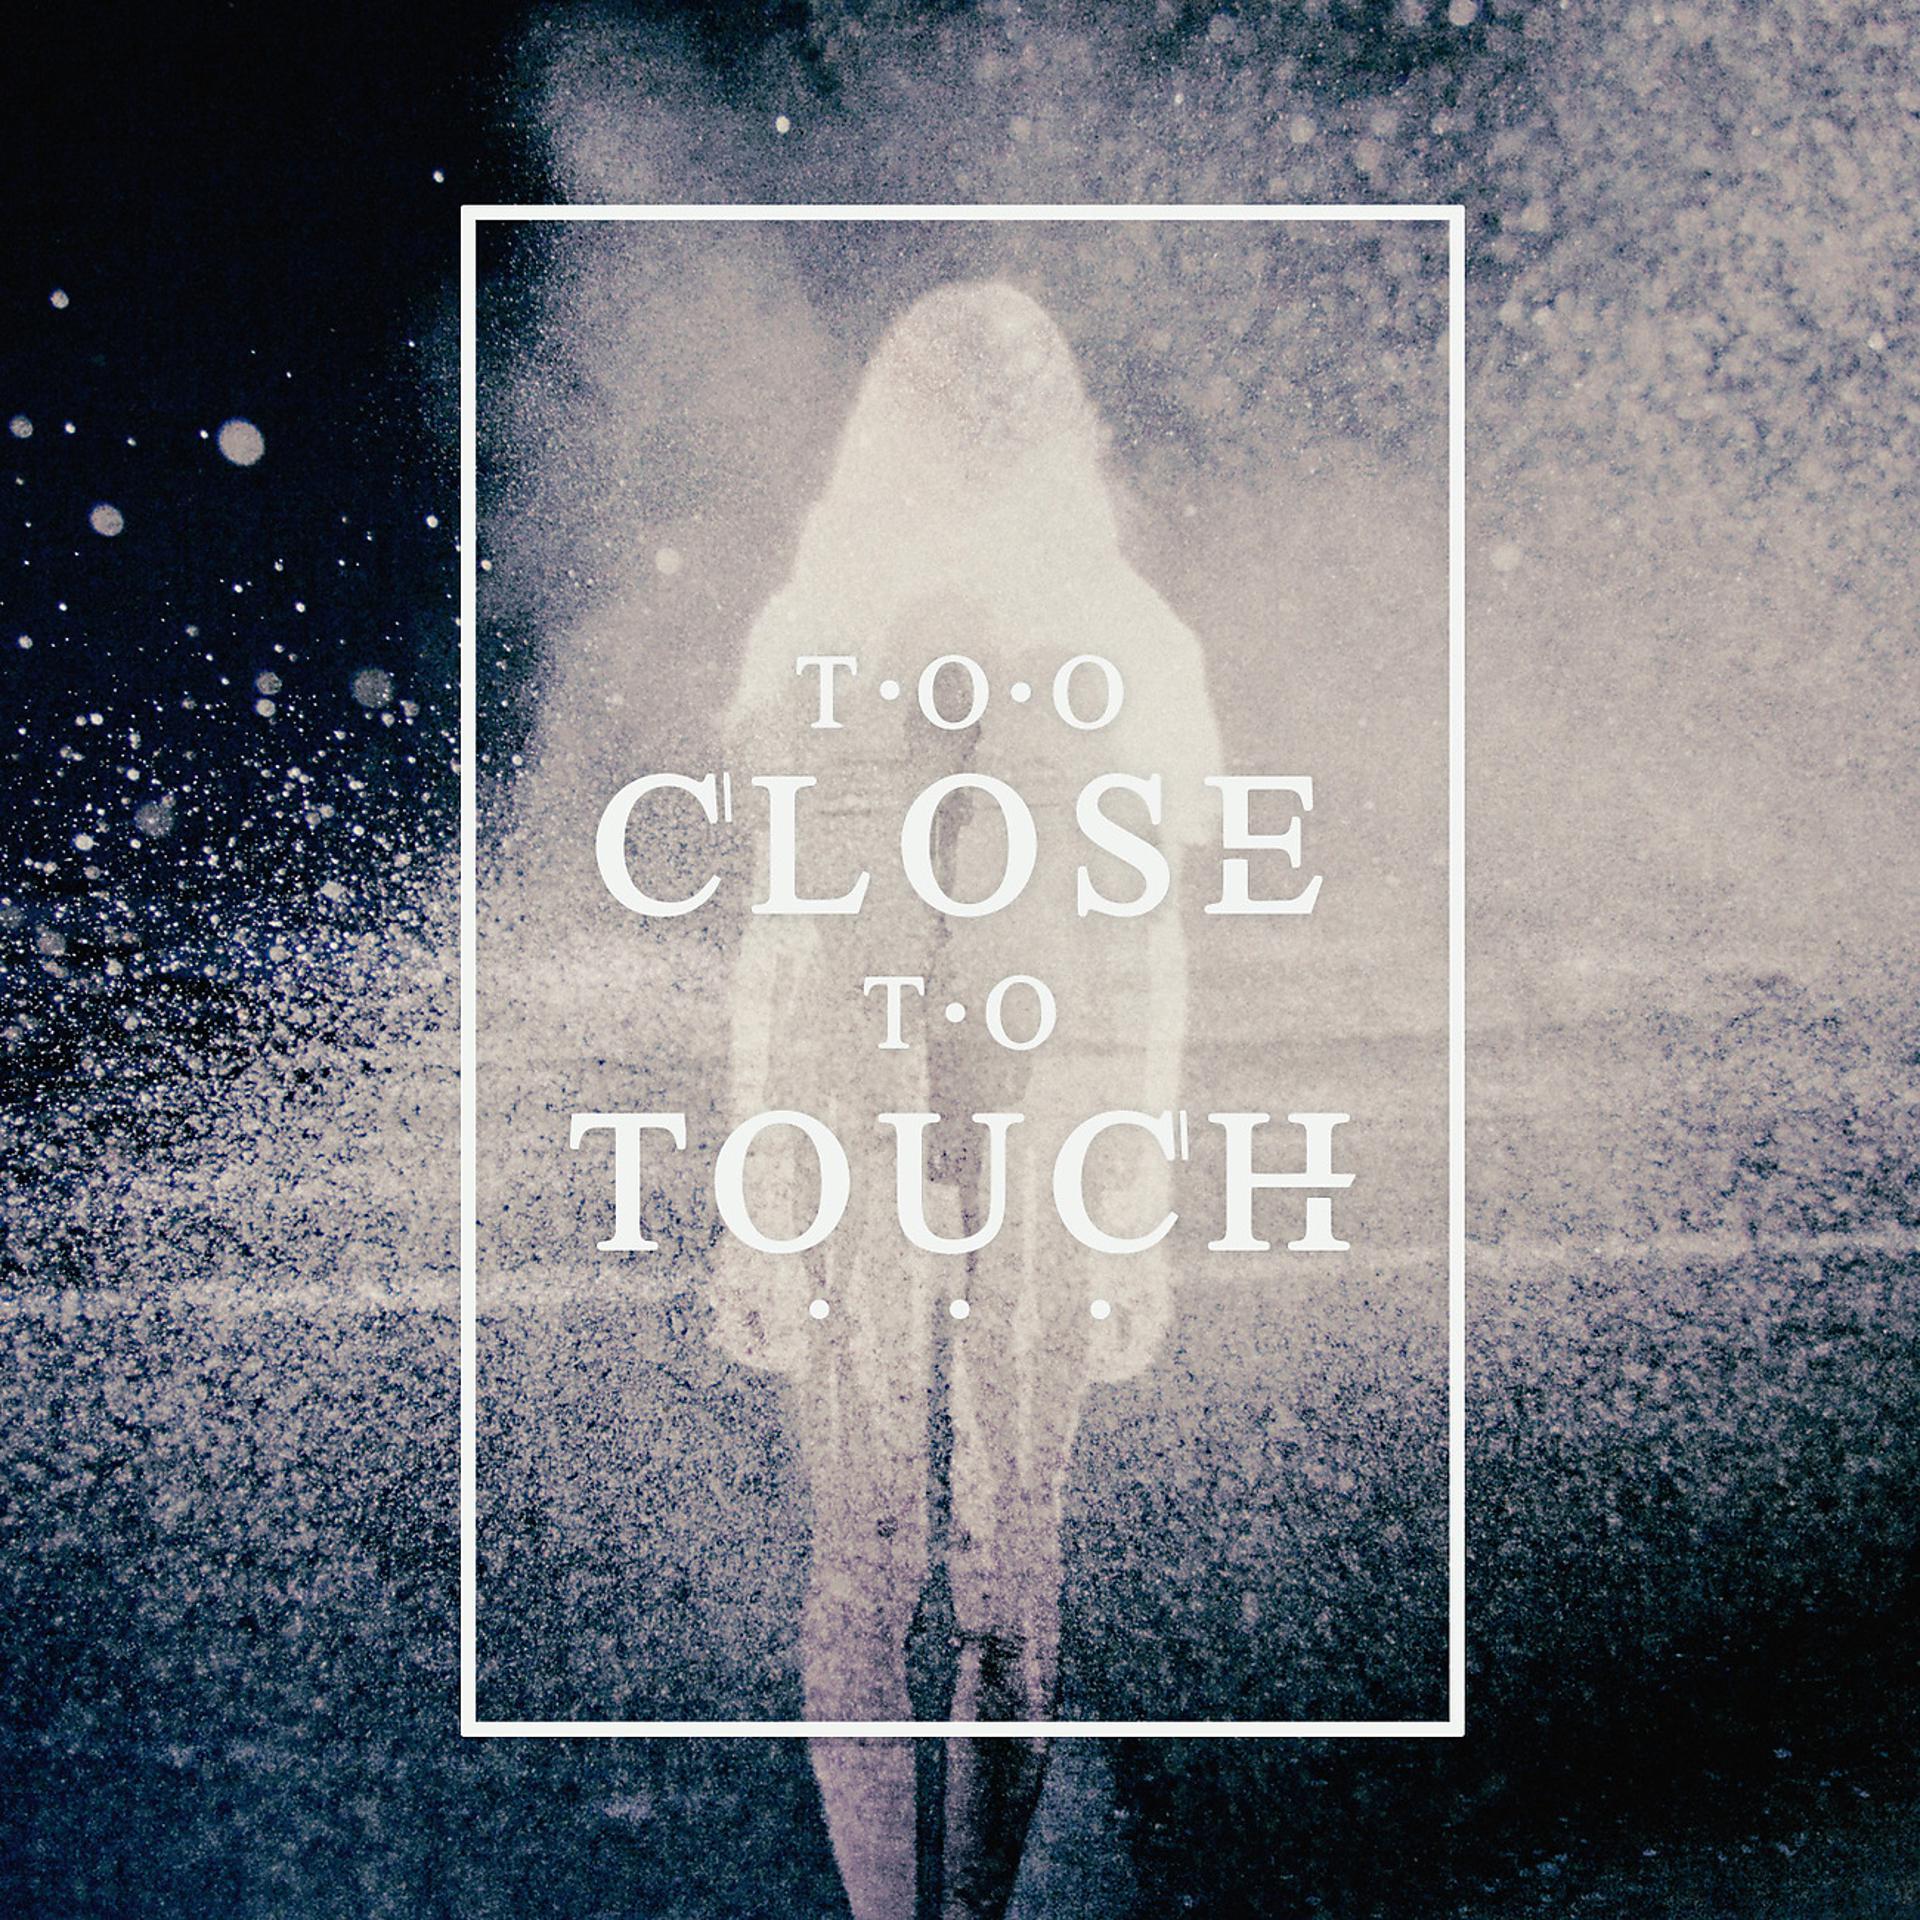 Too close to Touch. Too close to Touch album. Too close to Touch Sympathy. Китон Пирс too close to Touch. Closer to c